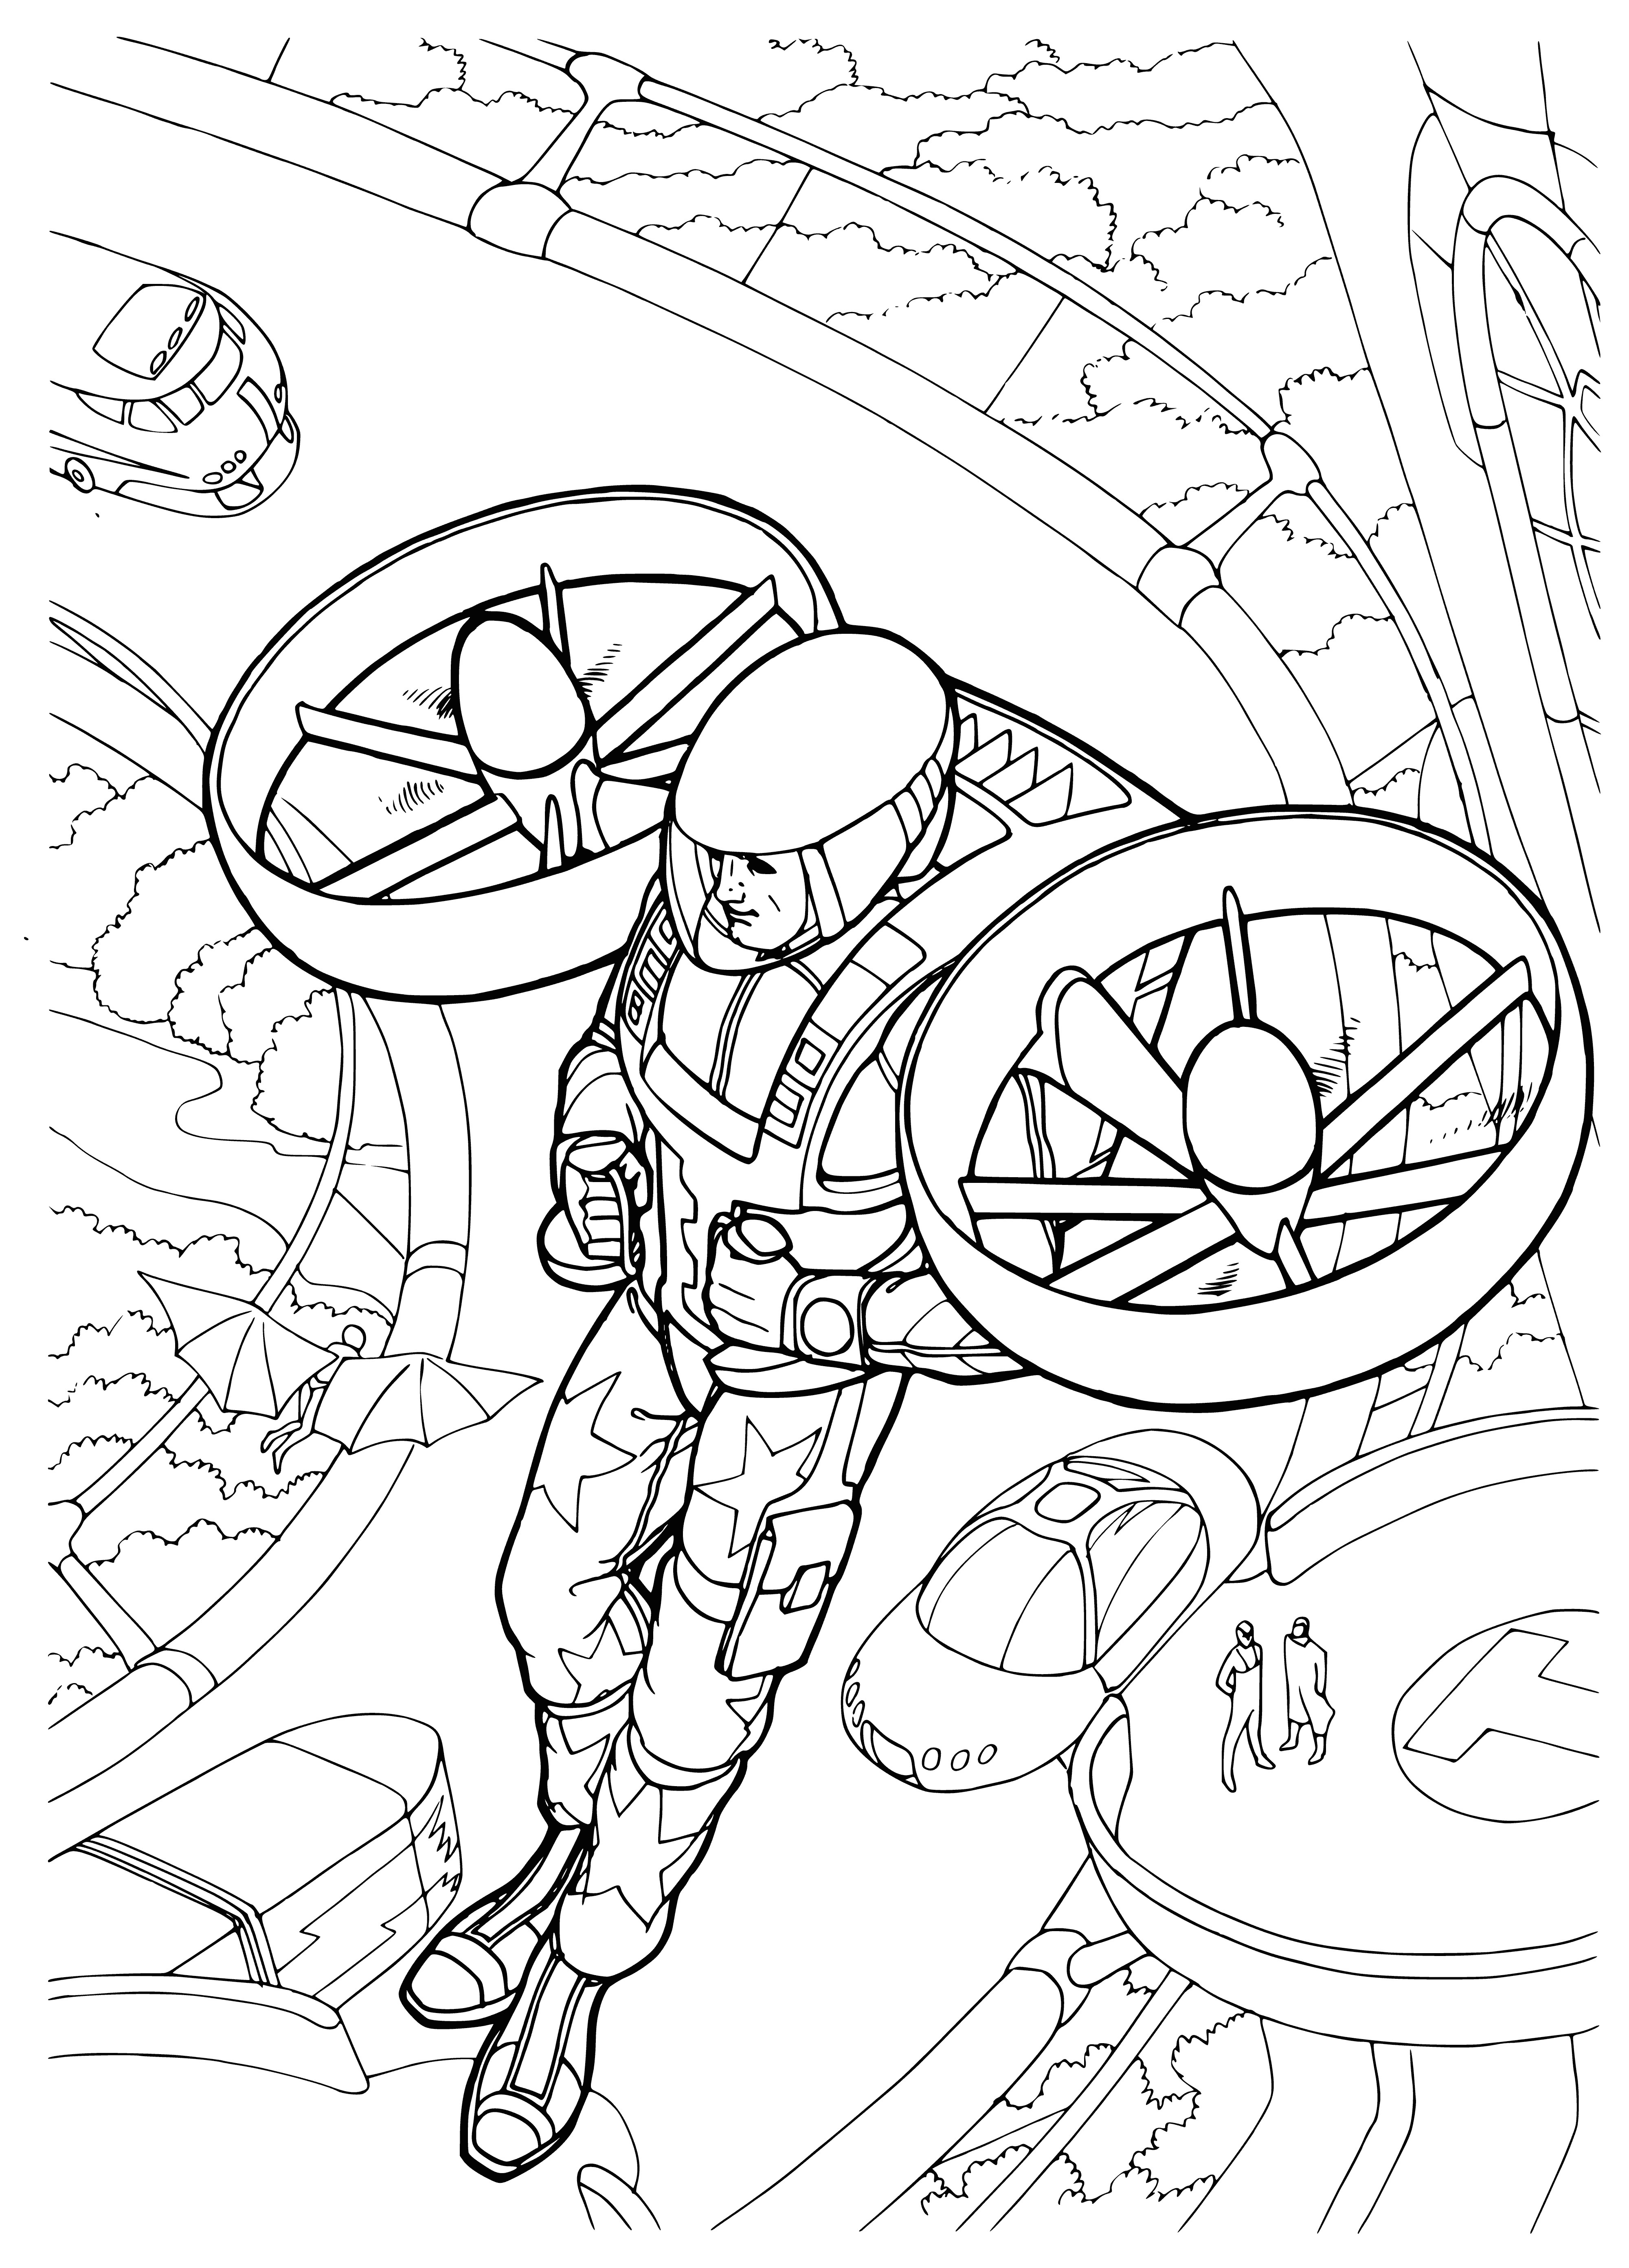 coloring page: The future of transport is a fast and efficient helicopter that can zip through the skies. #transportation